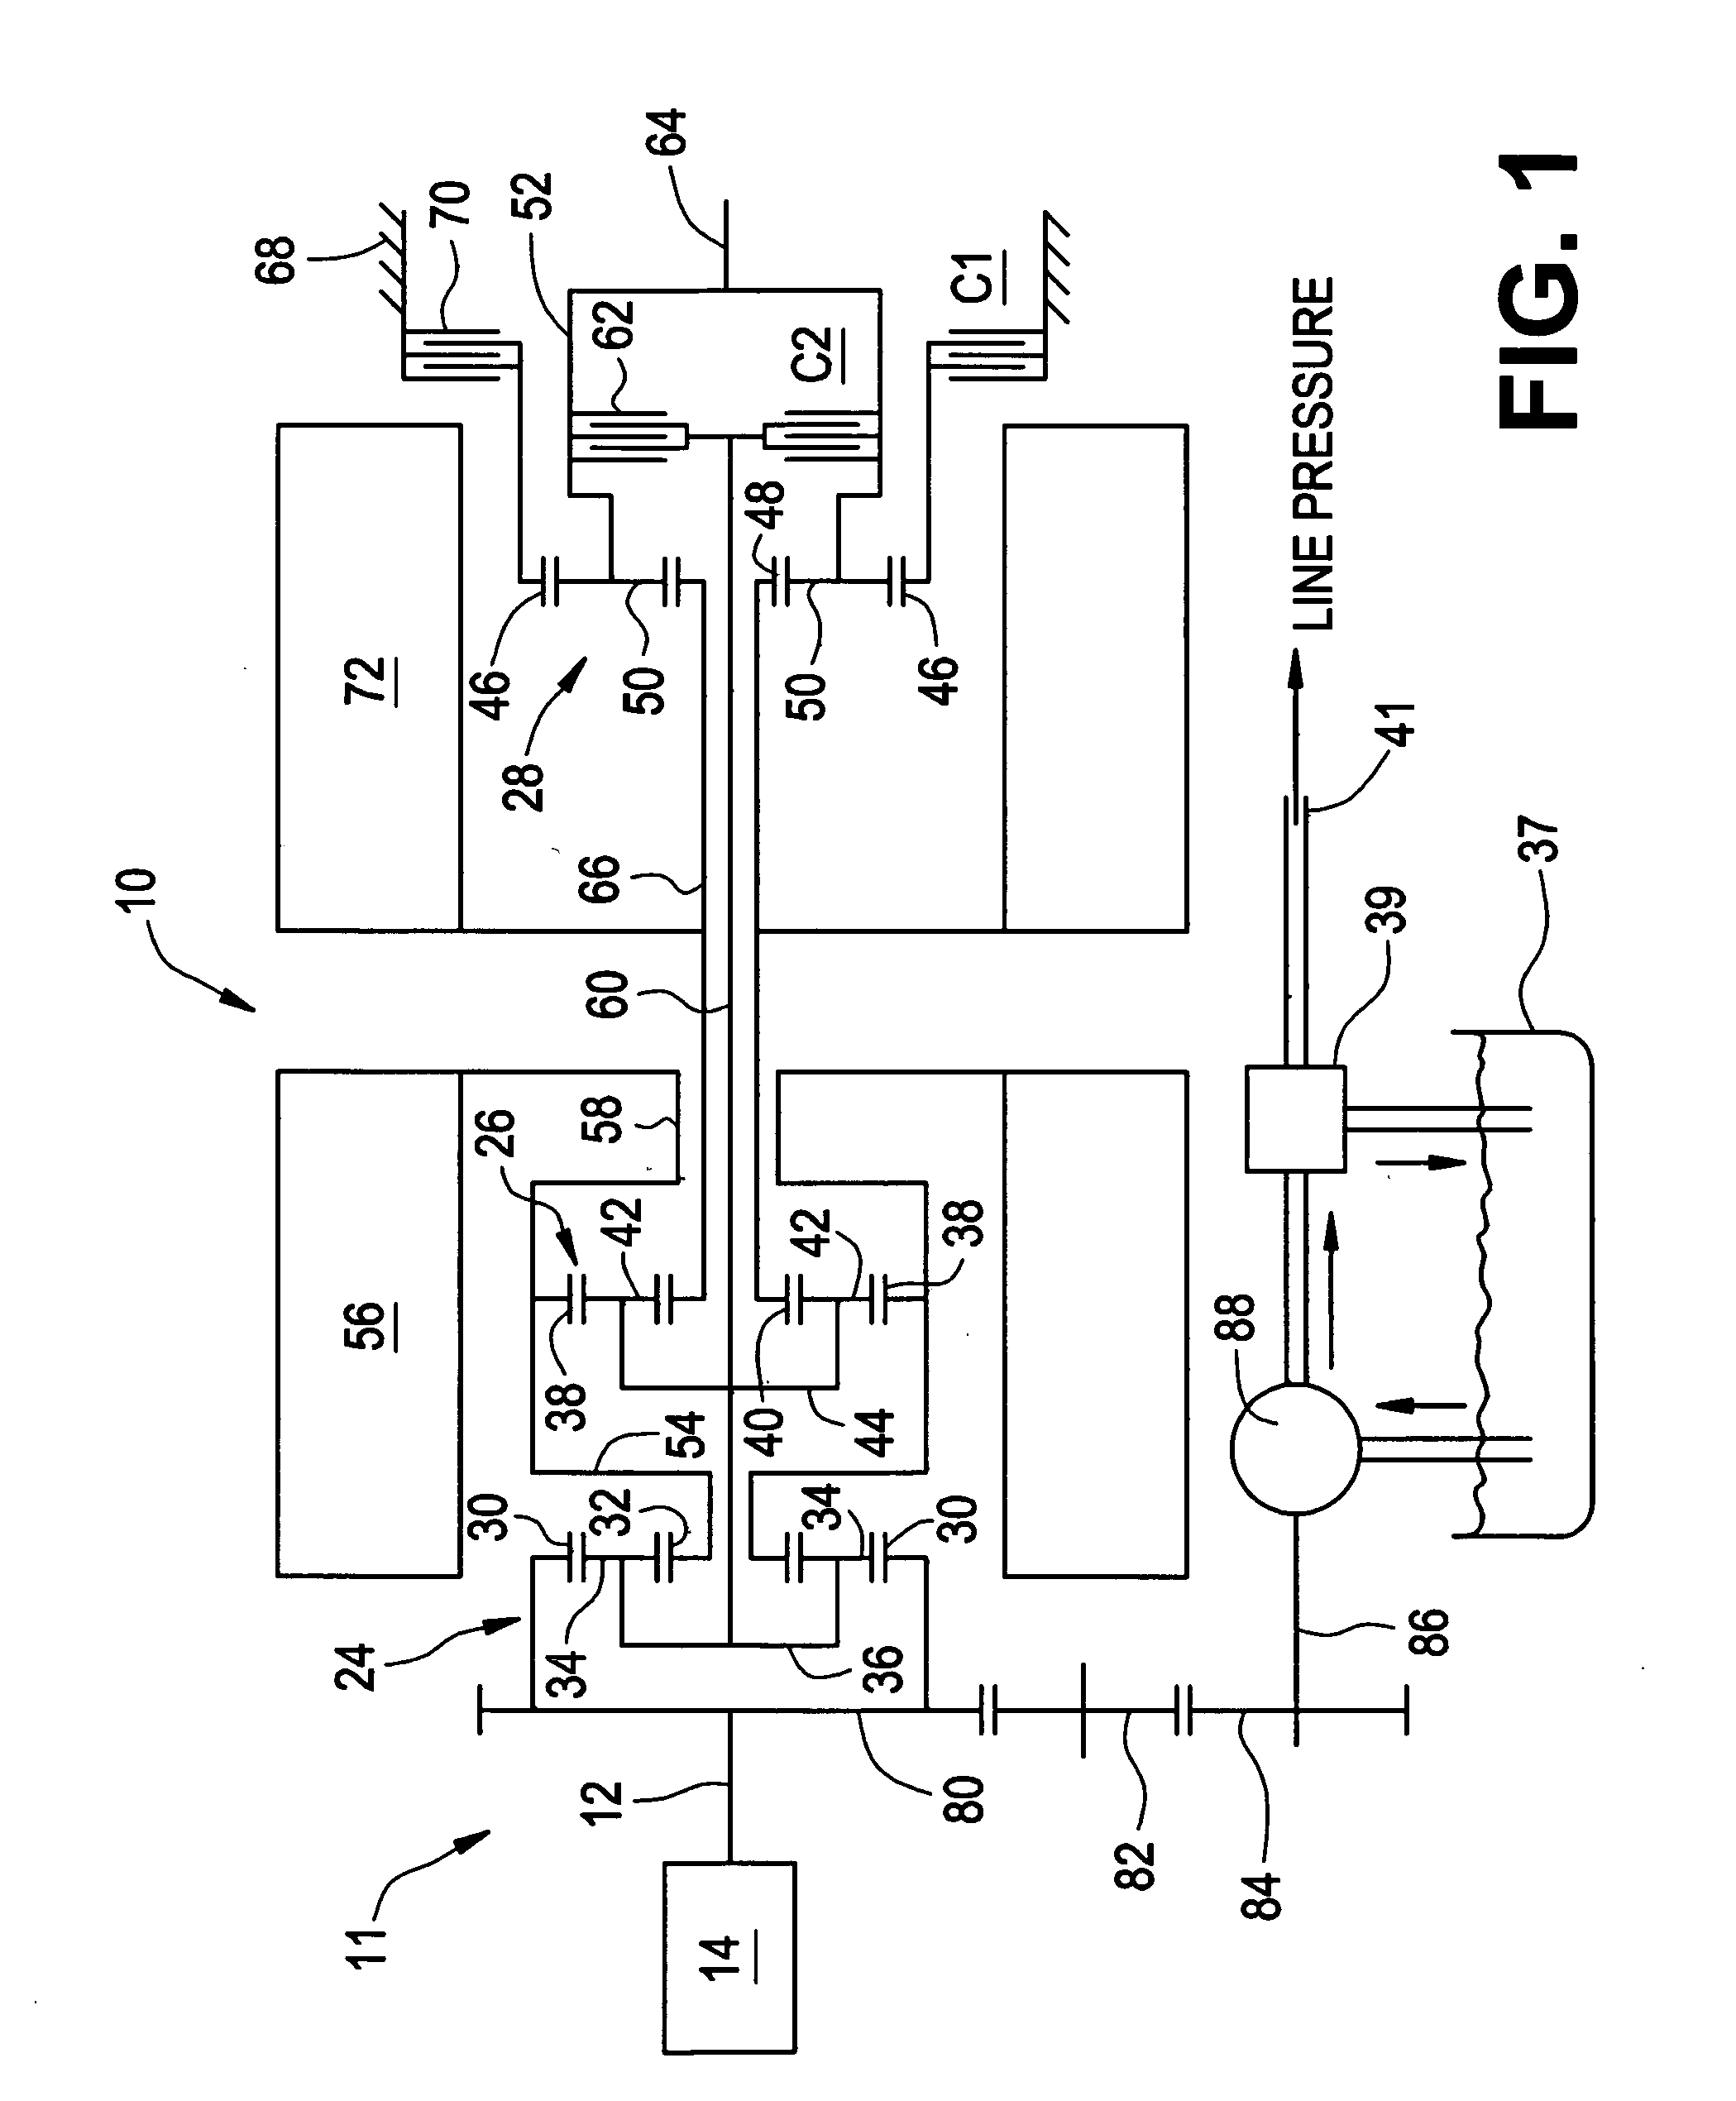 Optimal selection of input torque considering battery utilization for a hybrid electric vehicle